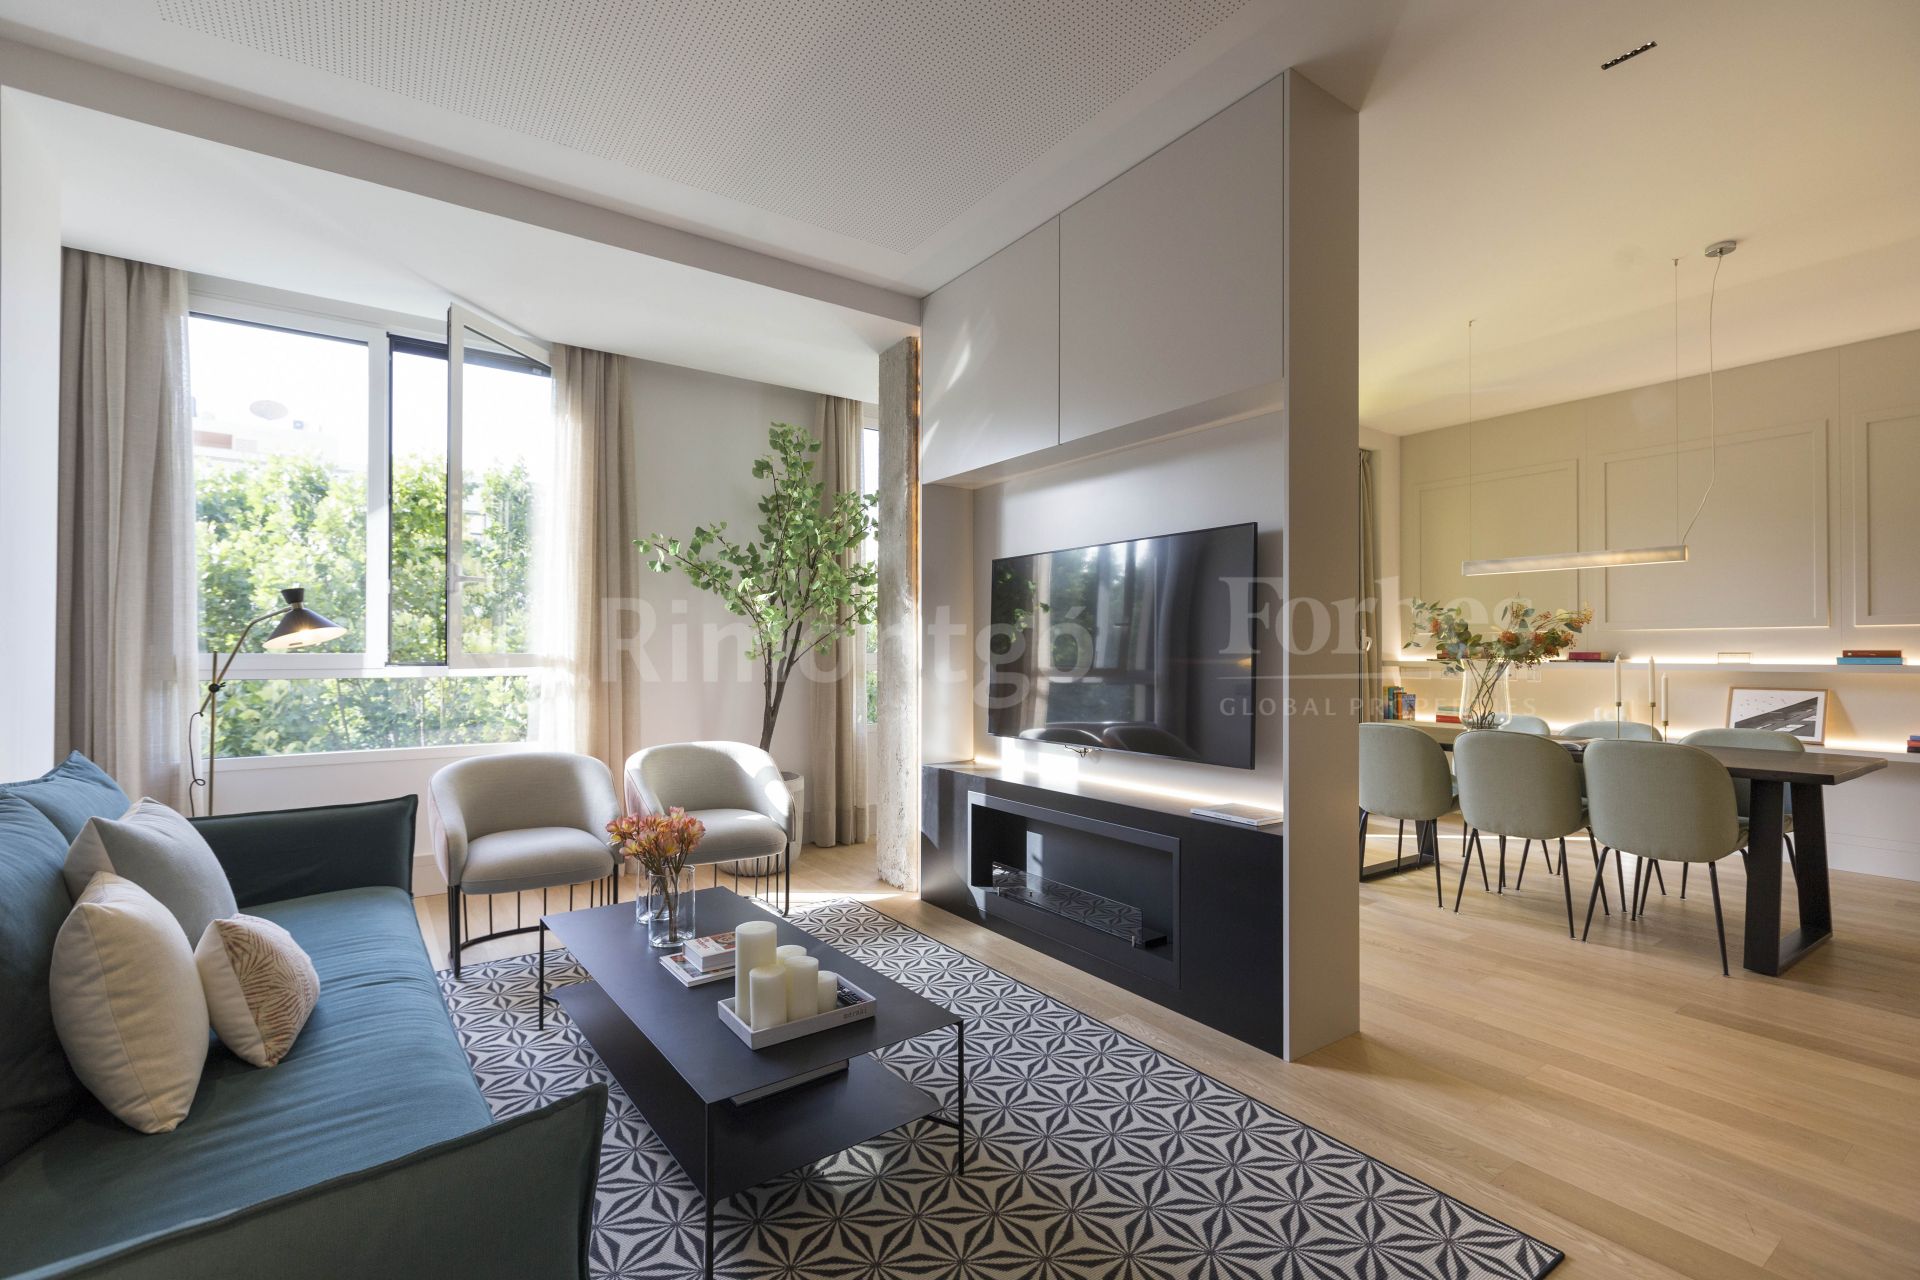 Brand new renovated apartment in Gran Vía with views of the gardens and next to the Turia riverbed.